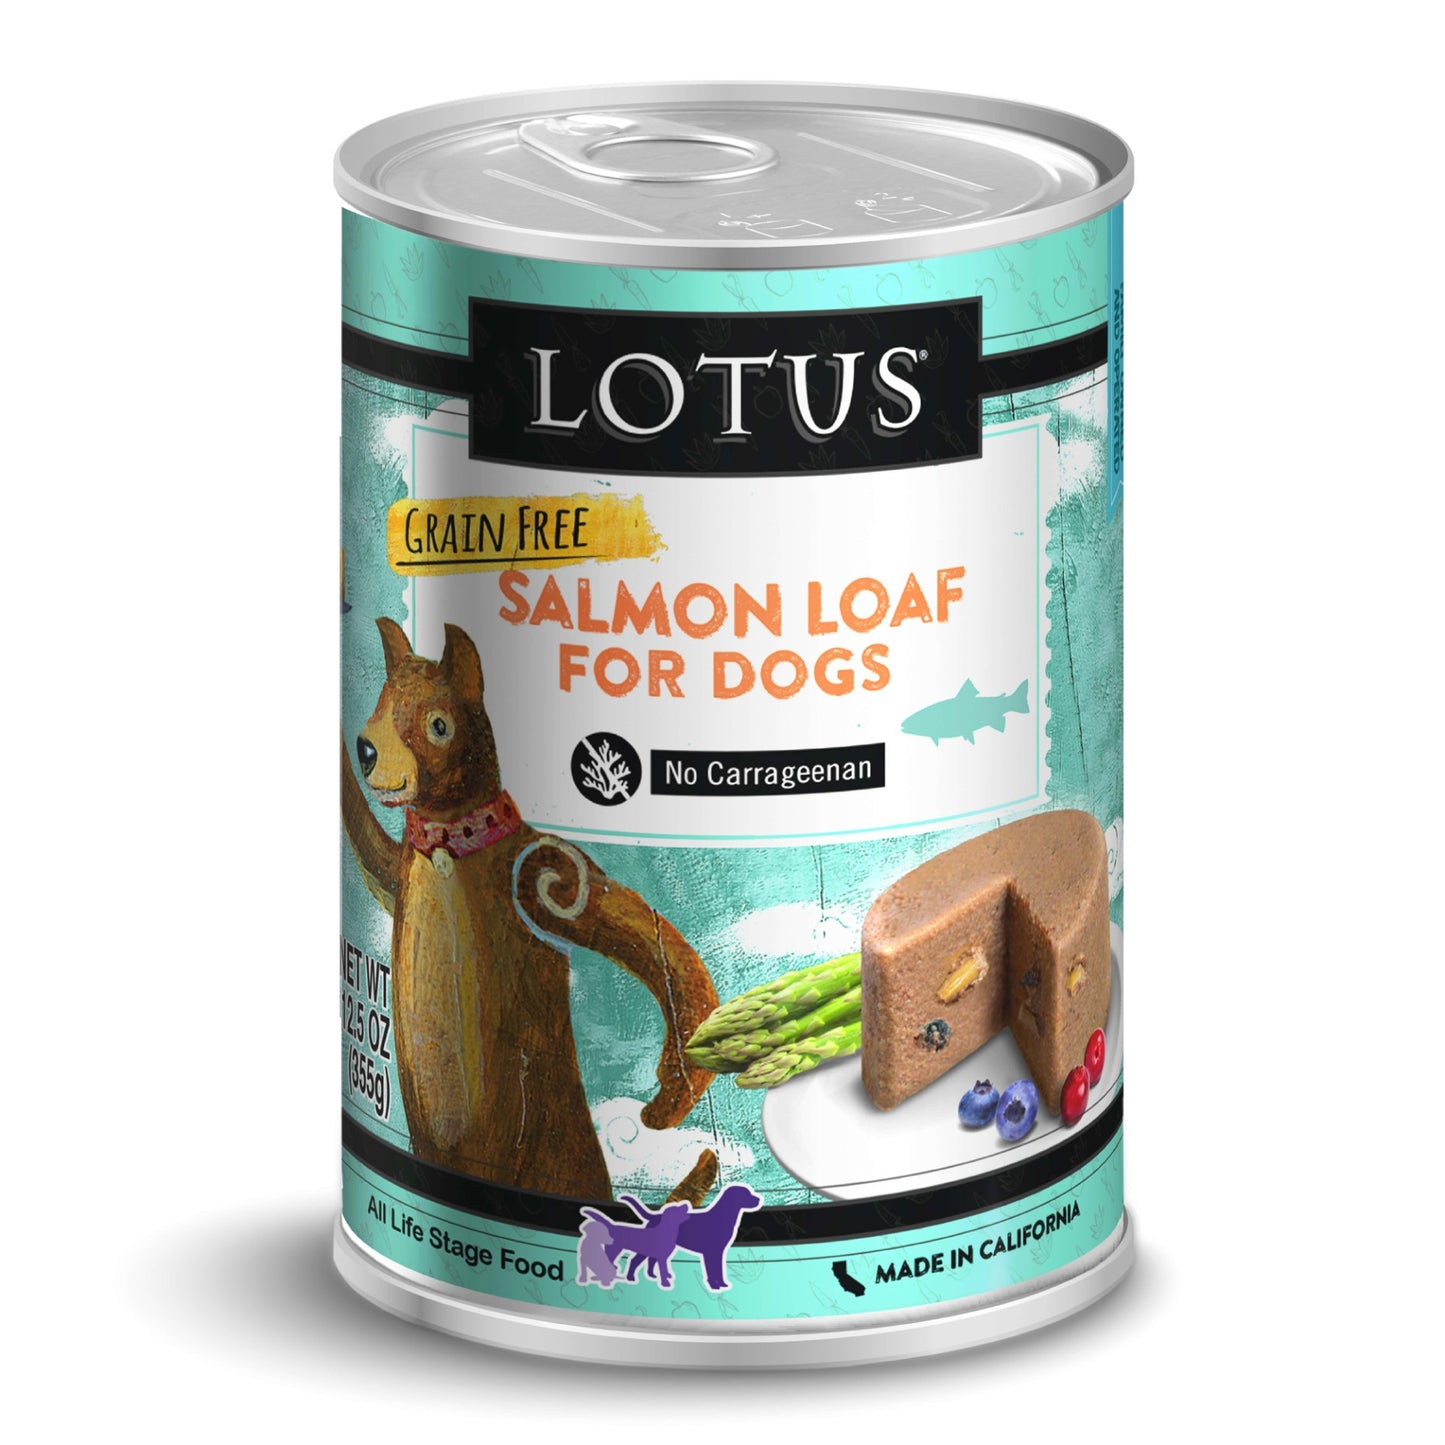 Lotus Dog Grain-Free Salmon Loaf for Dogs